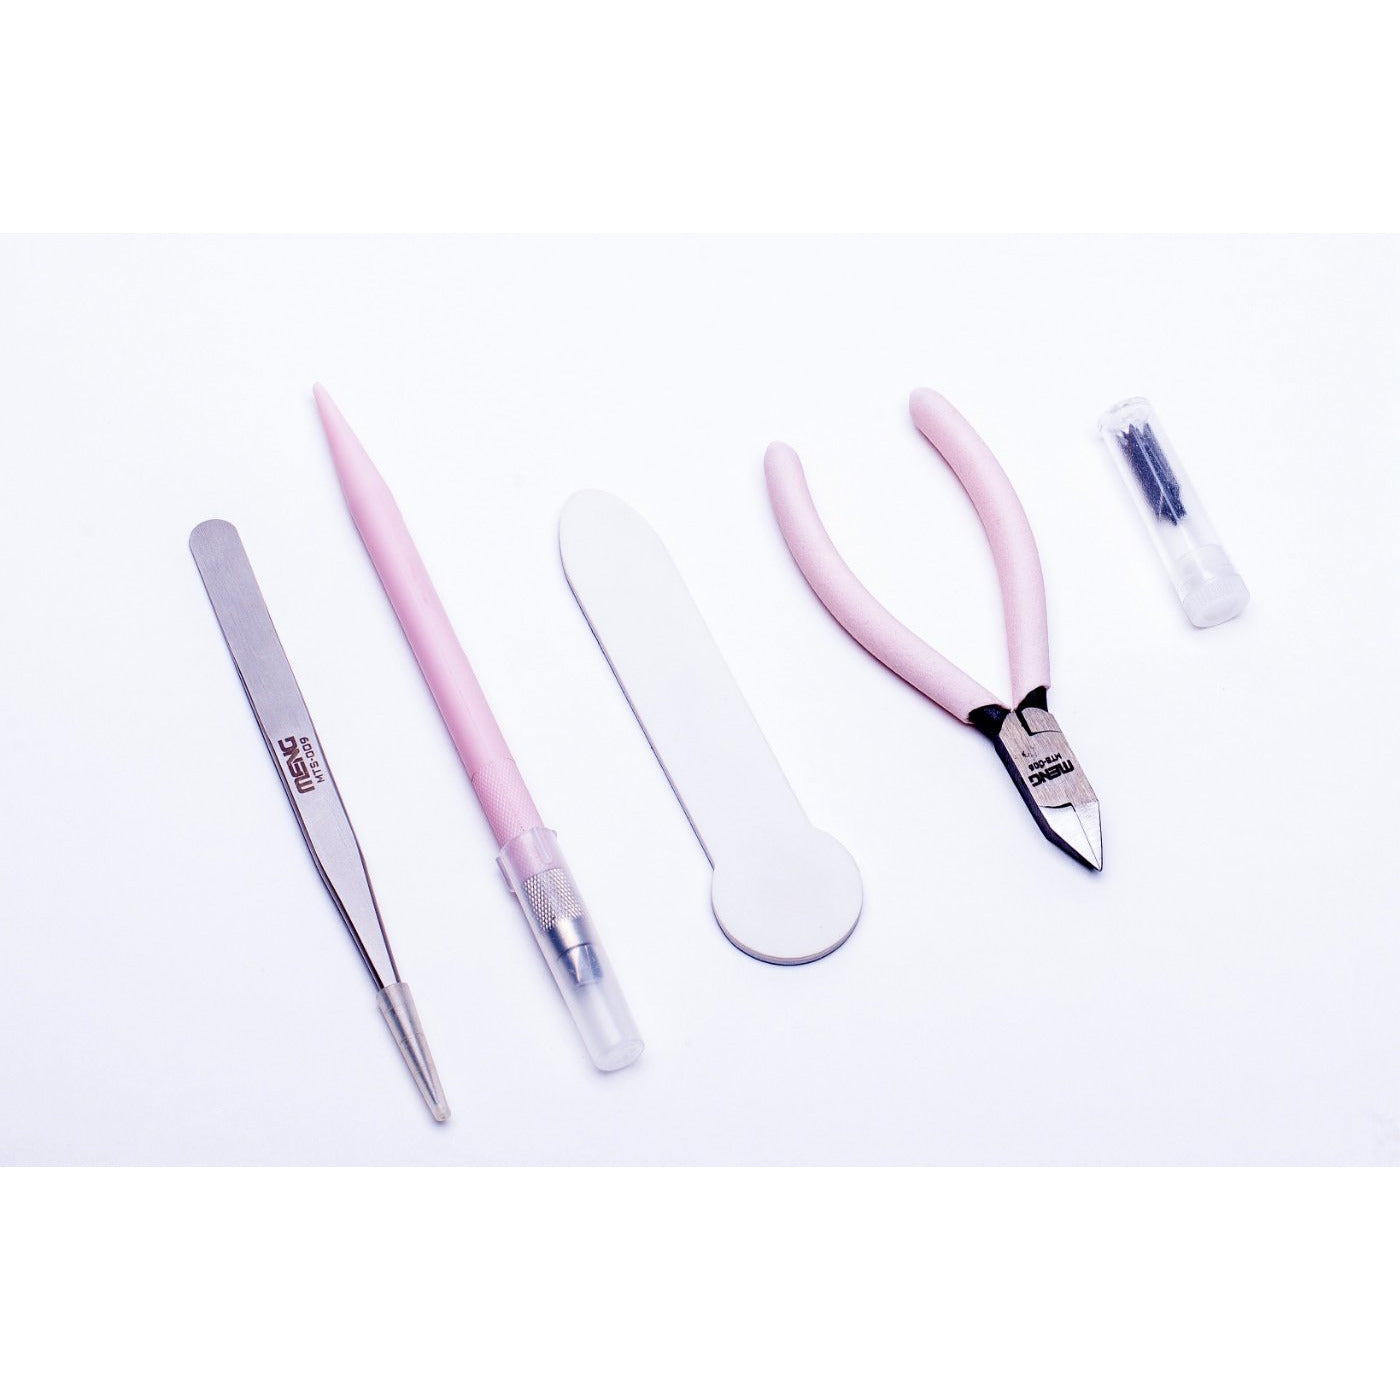 Pinky Tool Set by Meng